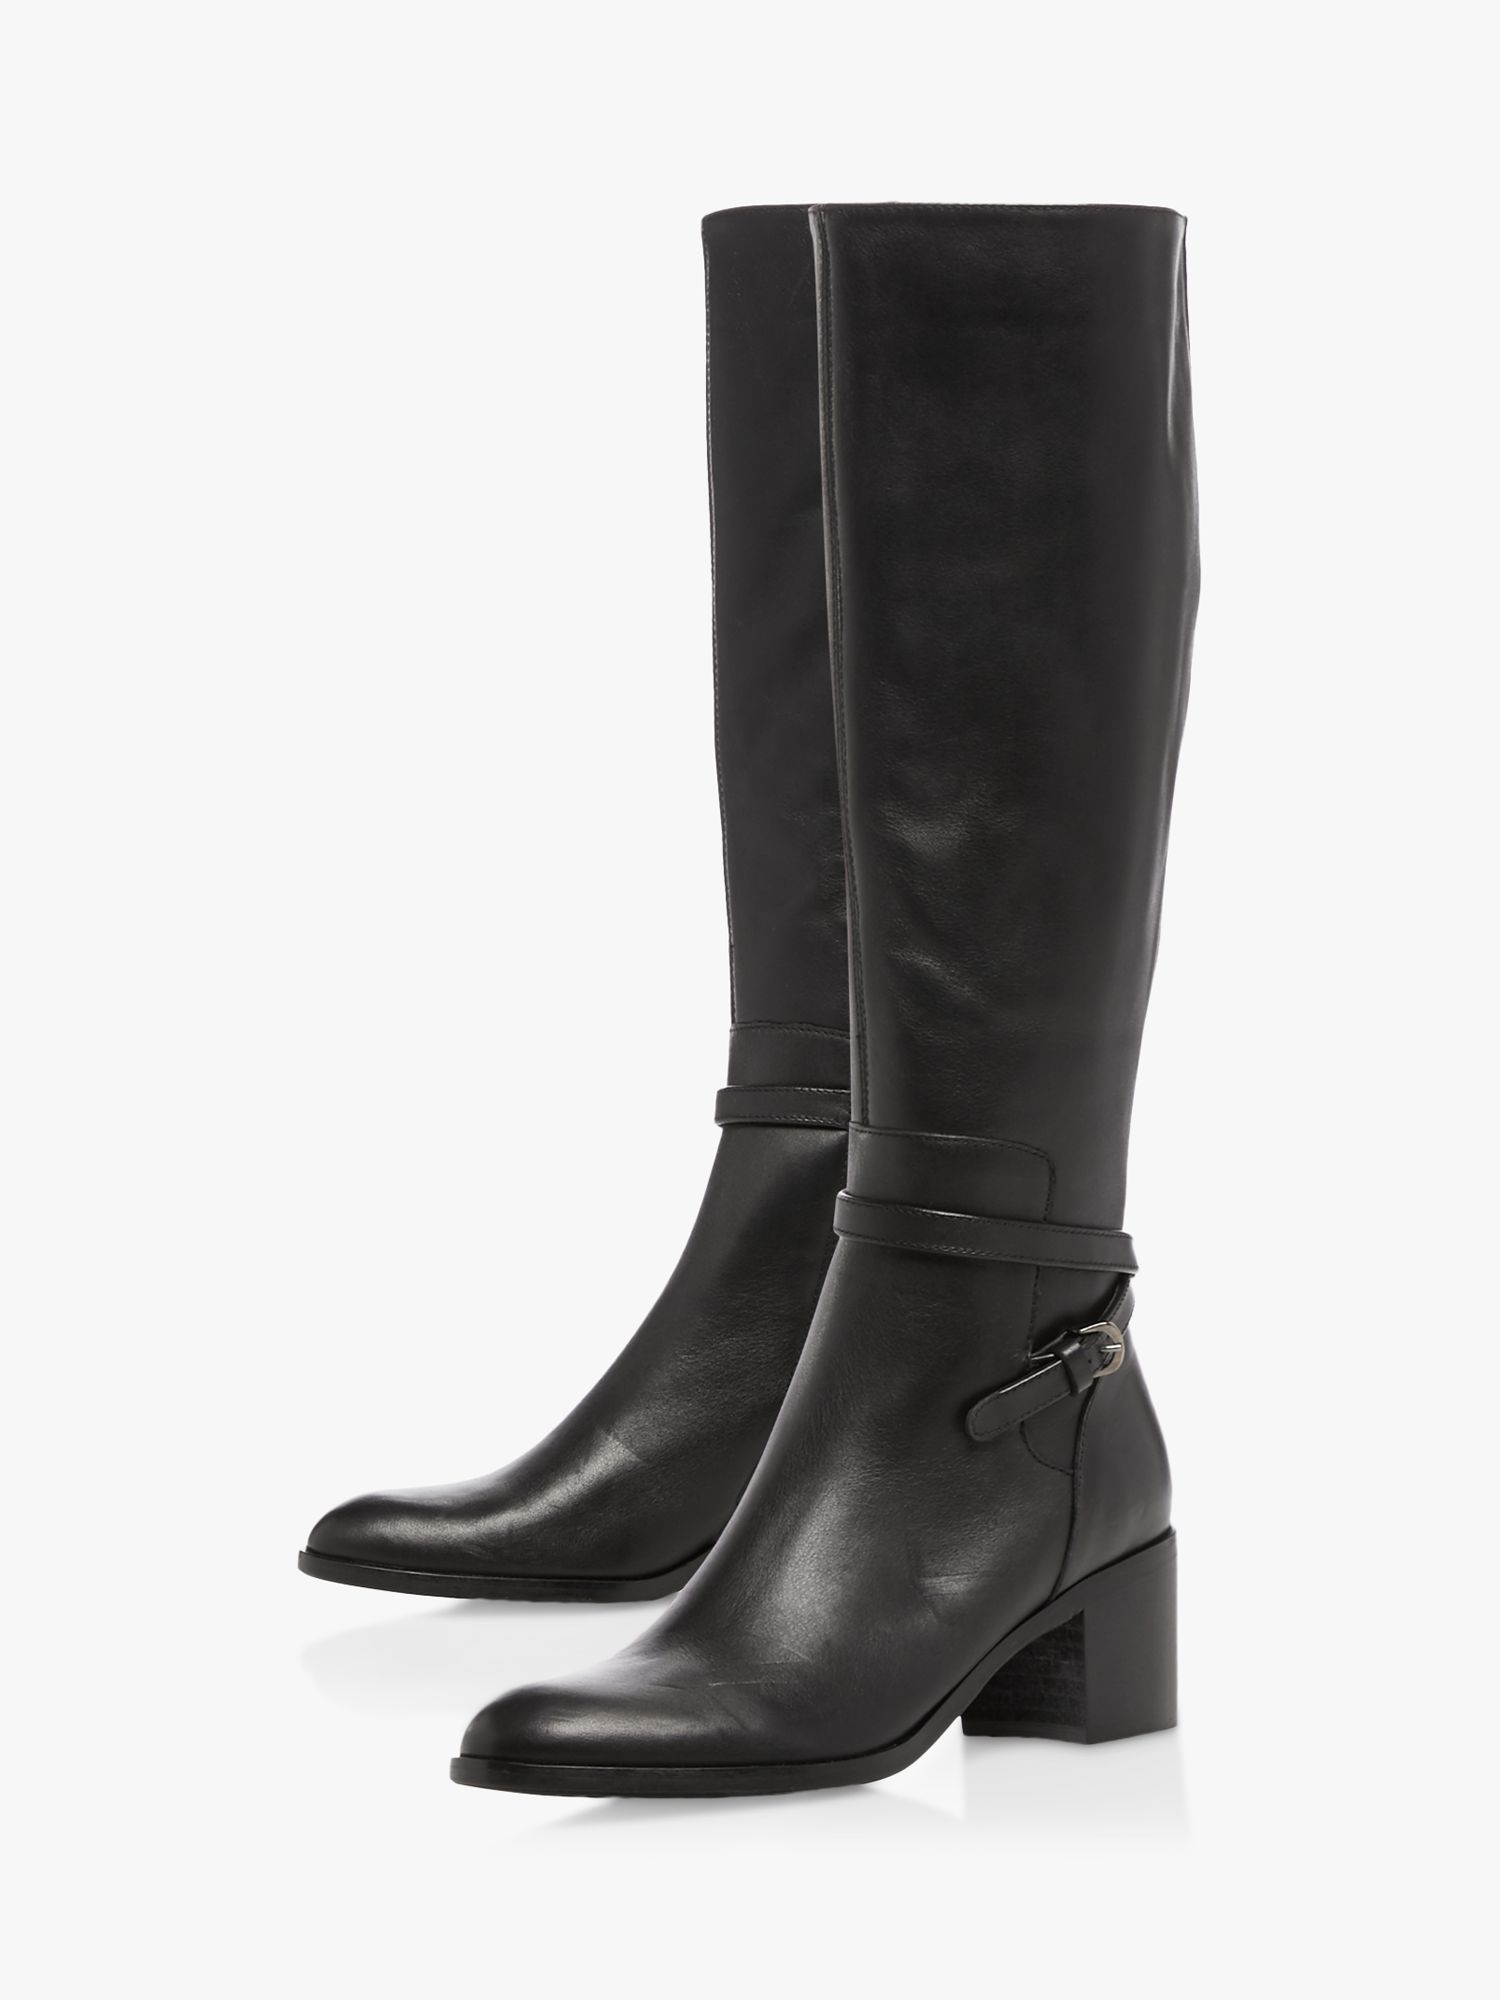 Dune Taxi Leather Buckle Strap Knee High Zip Up Boots, Black at John ...